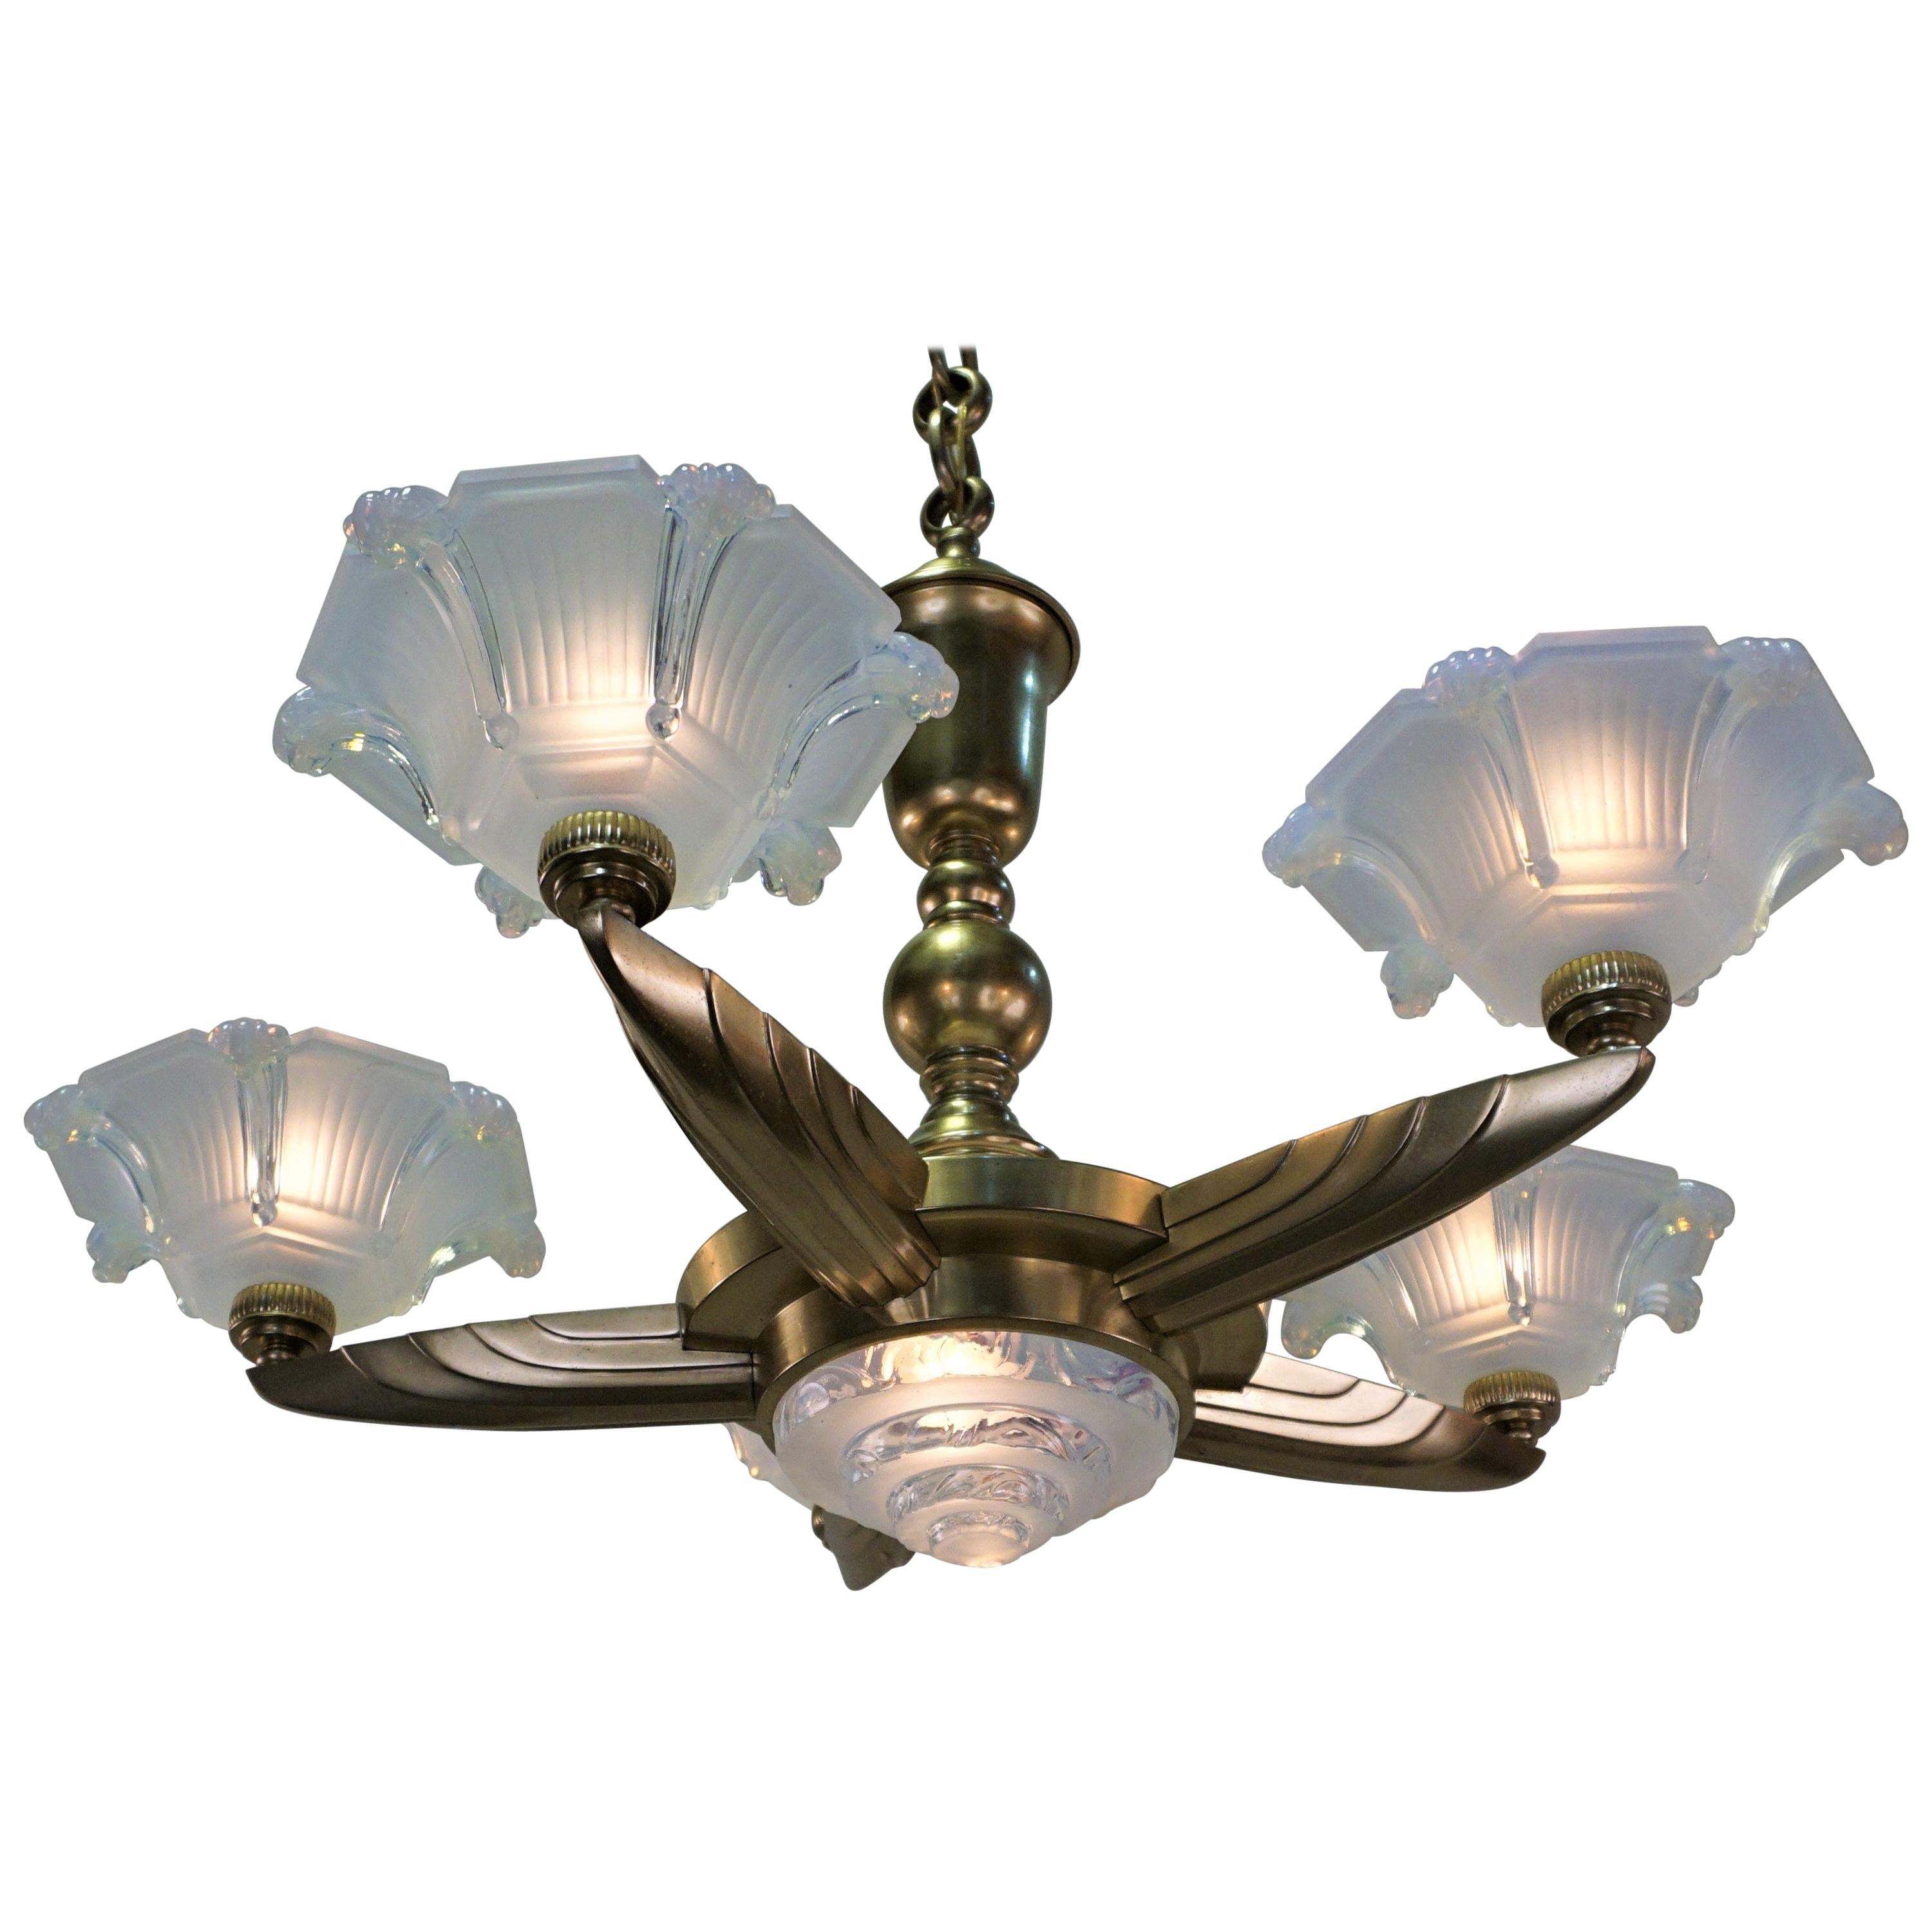 French 1930s Art Deco Bronze and Glass Chandelier by Ezan & Petitot